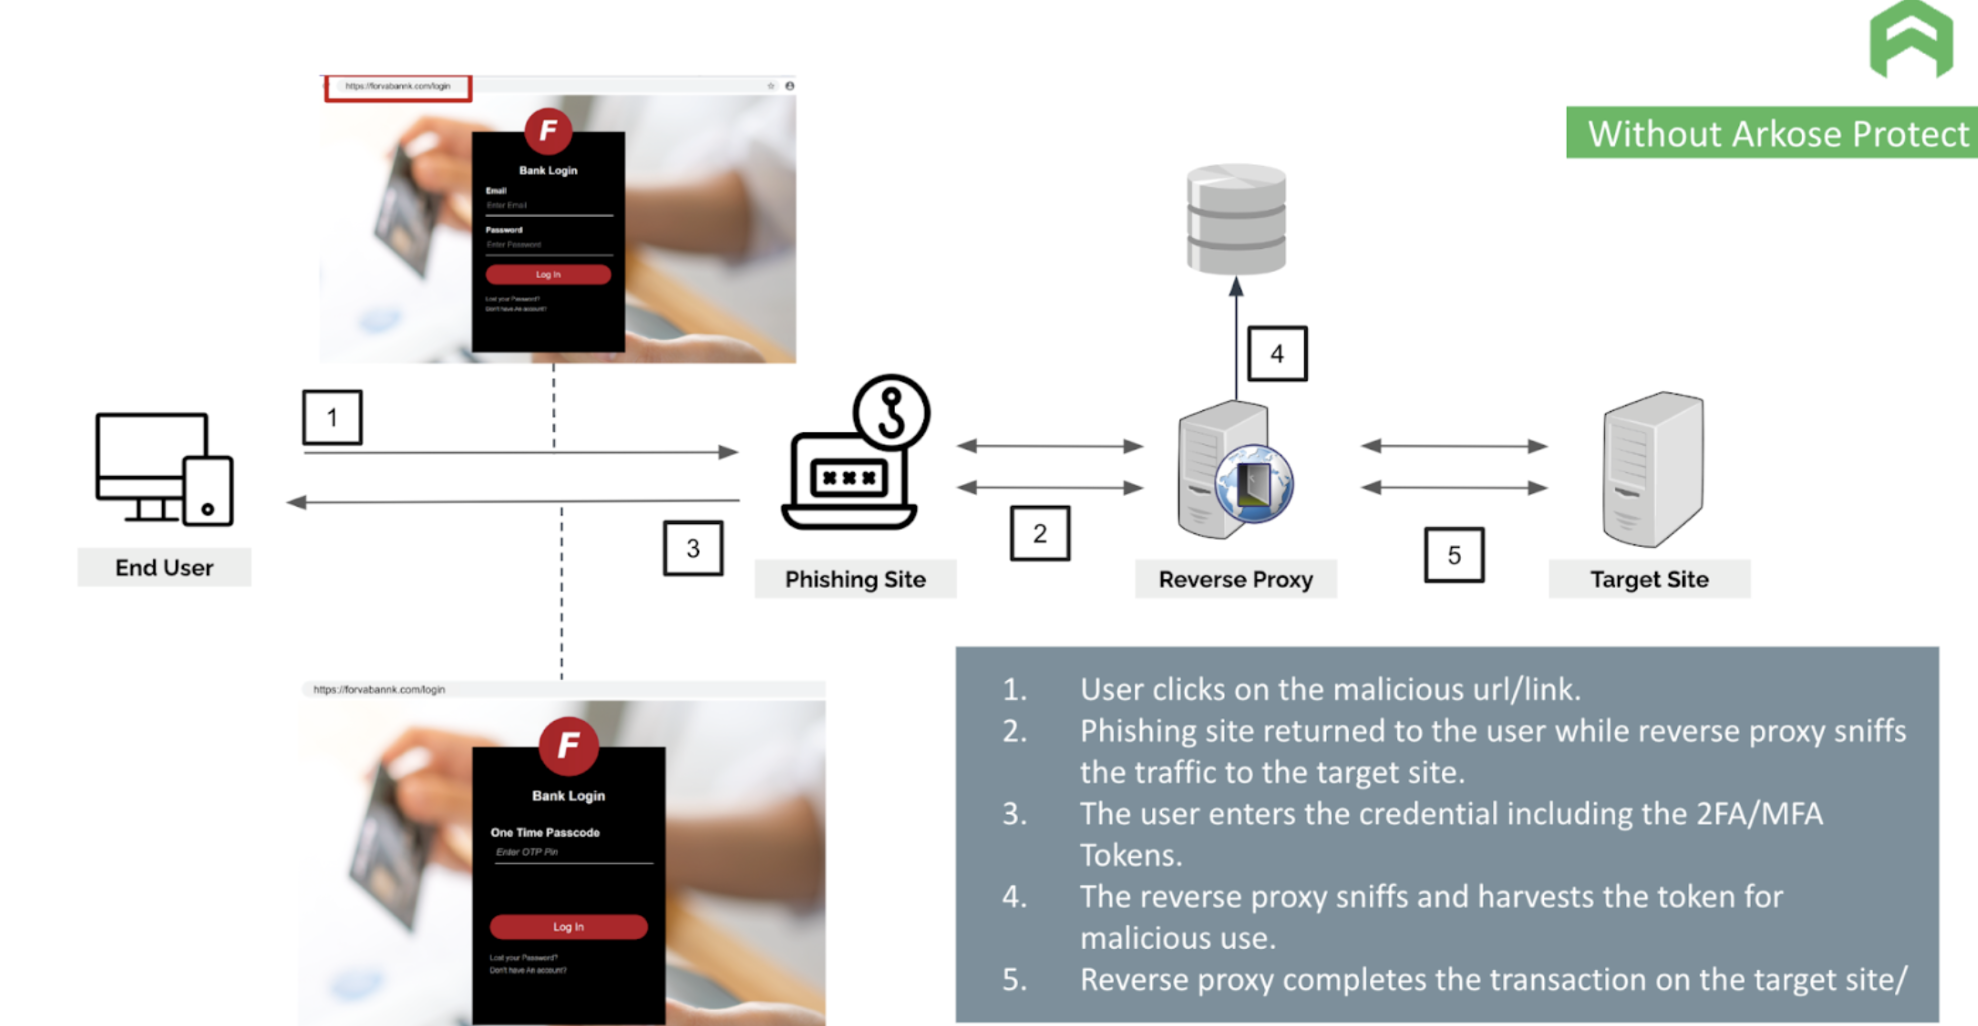 Diagram depicting a reverse proxy phishing attack without Arkose Protect